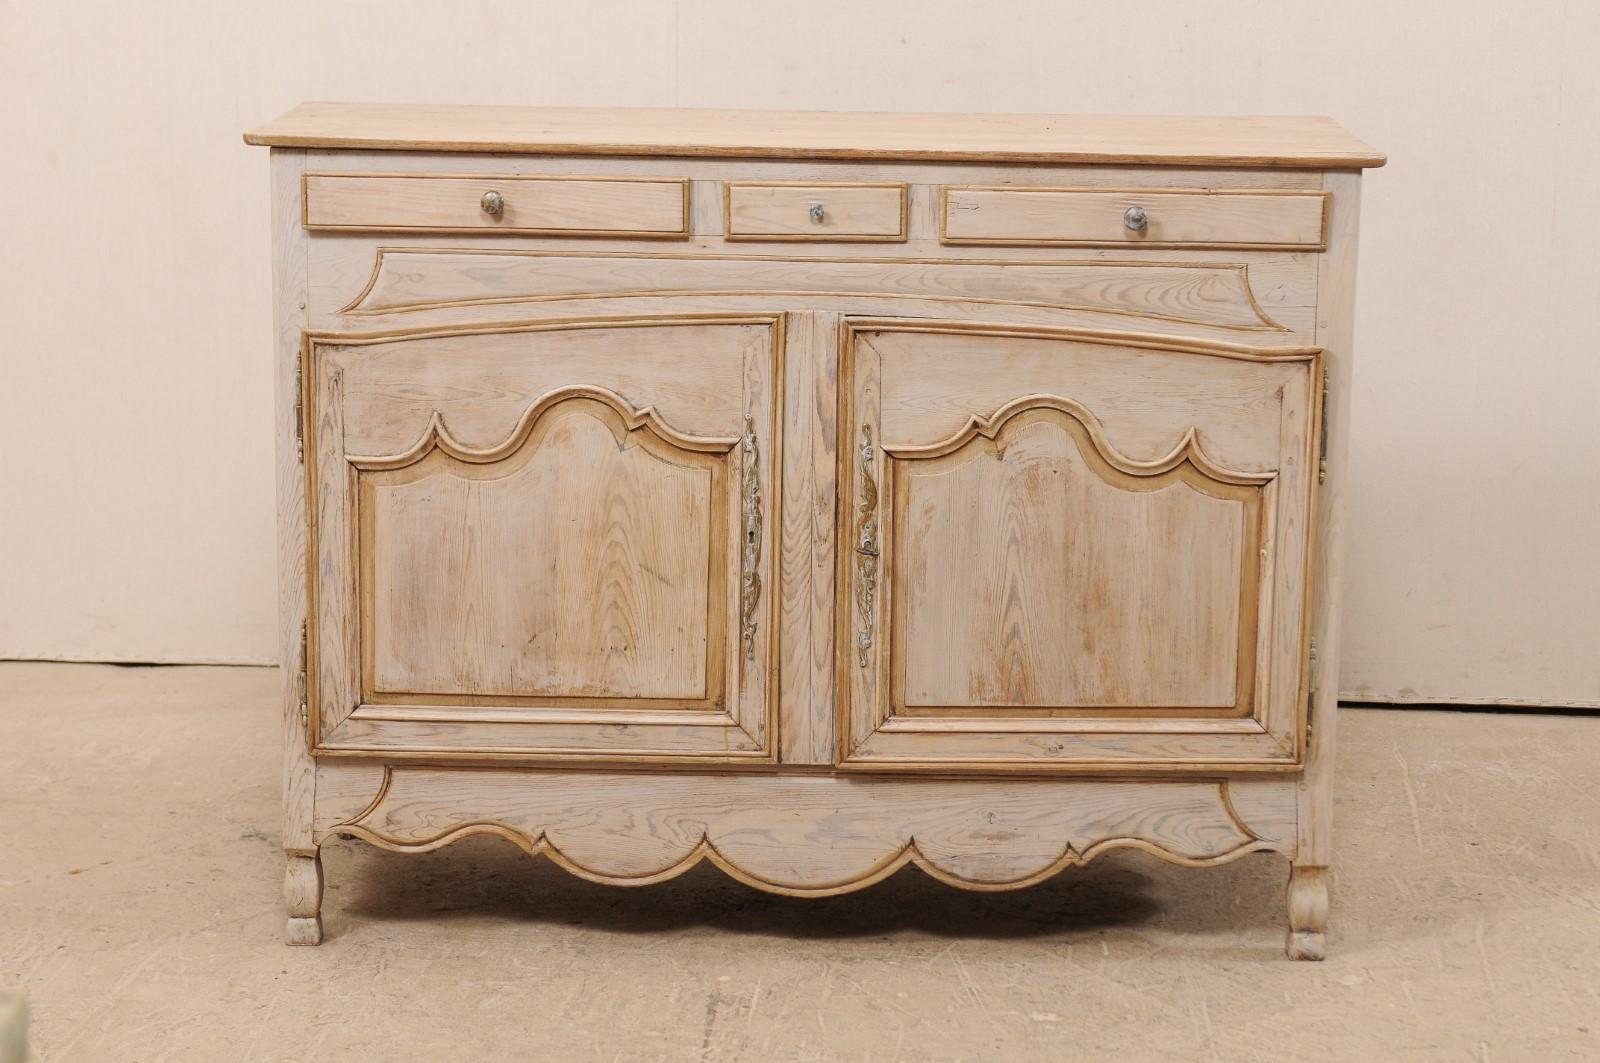 A French carved wood buffet cabinet from the early 19th century. This antique cabinet from France features a rectangular-shaped top with rounded front corners, atop an upper row of three thinly profiled drawers, which are seated above a pair of